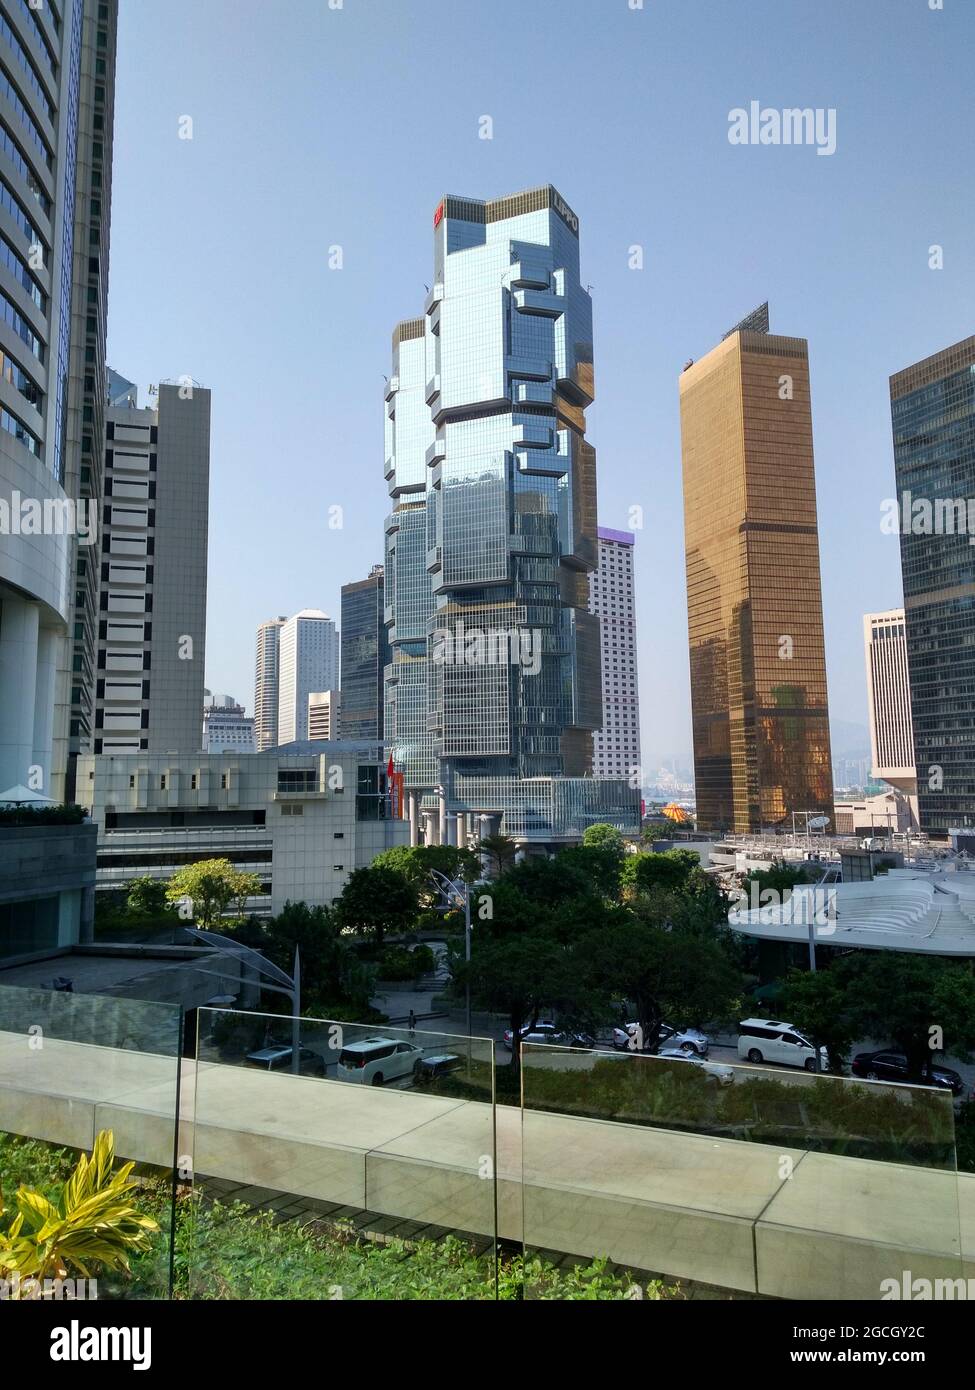 The Lippo Centre in Admiralty, the rich business financial center as seen from the Conrad Hotel with tons of skyscrapers, high rises, and cars Stock Photo